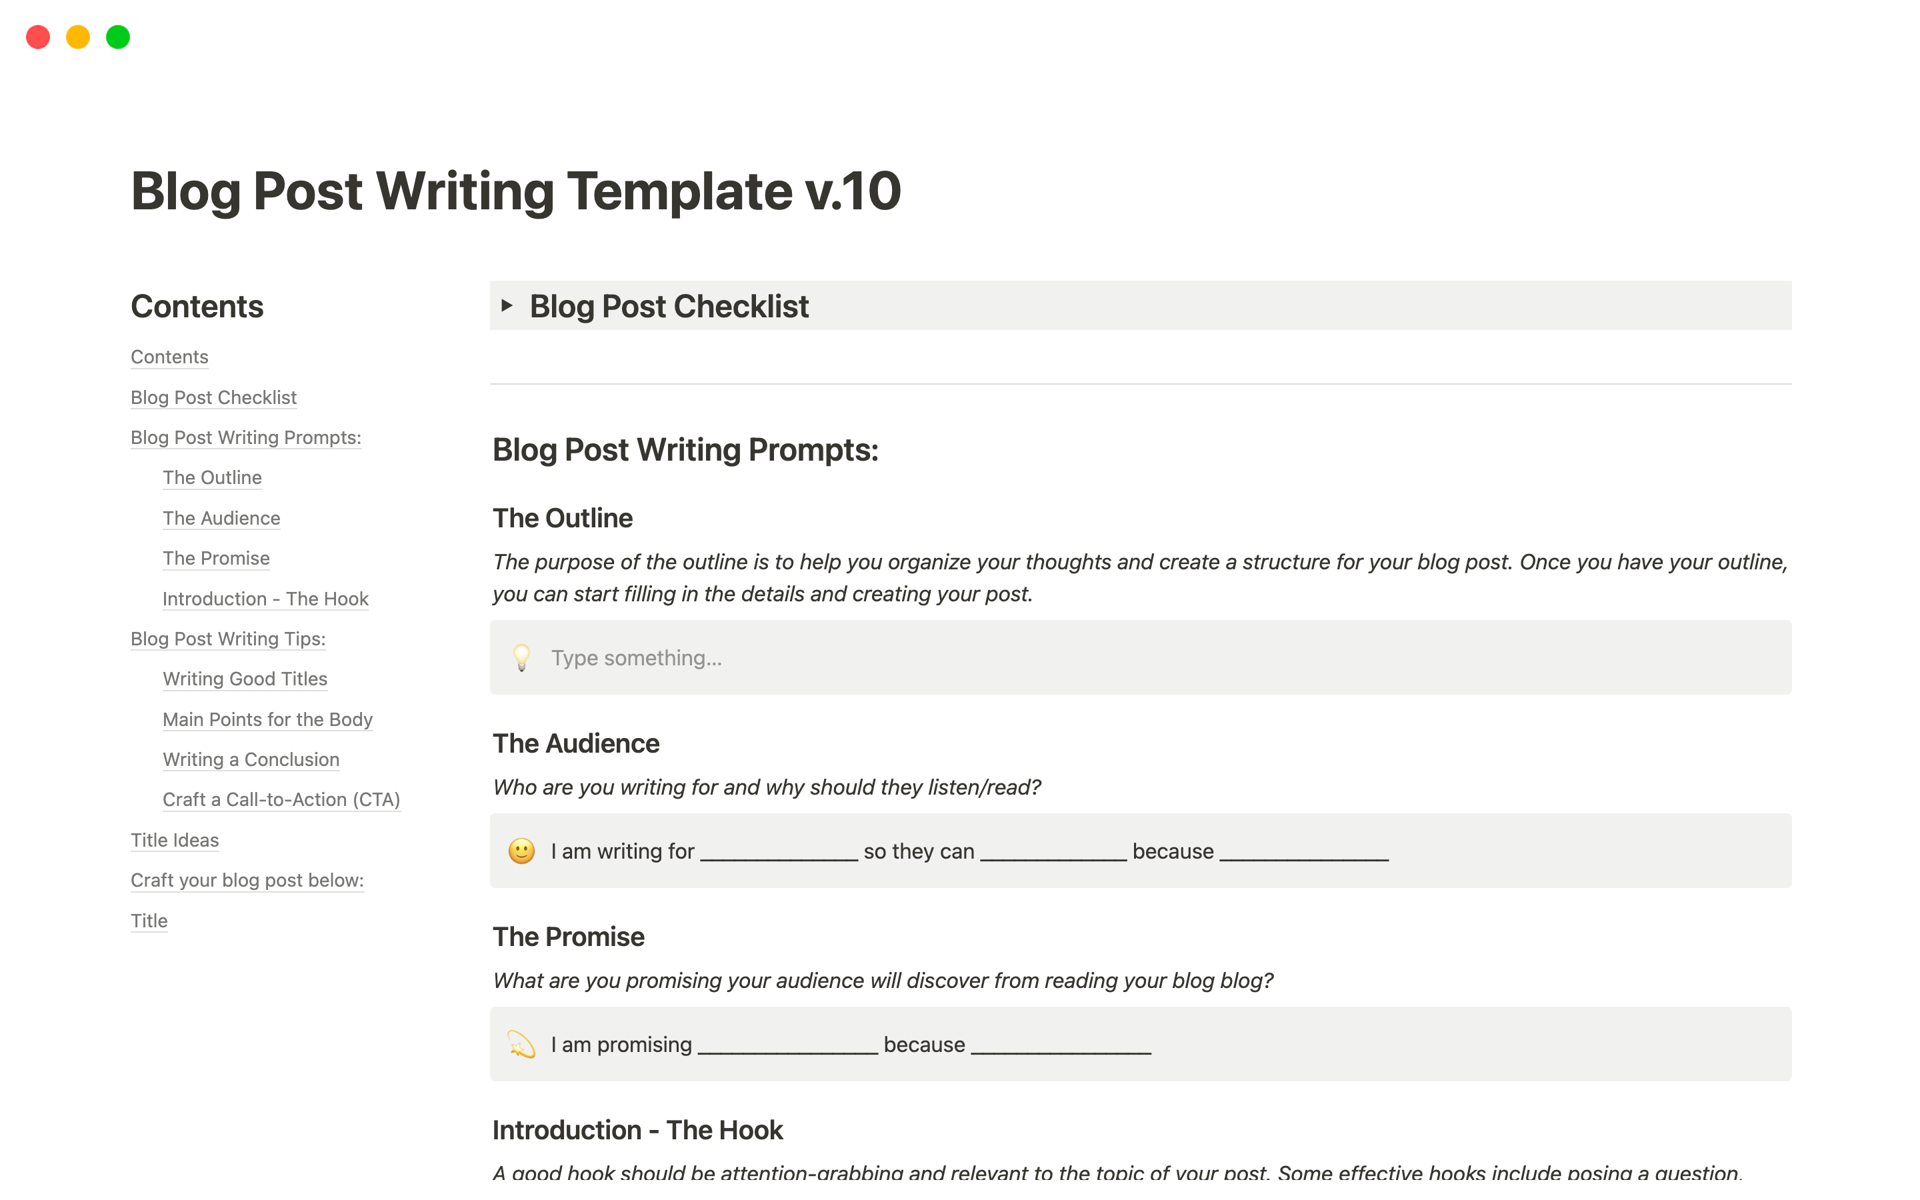 A template preview for Blog Post Writing Guide